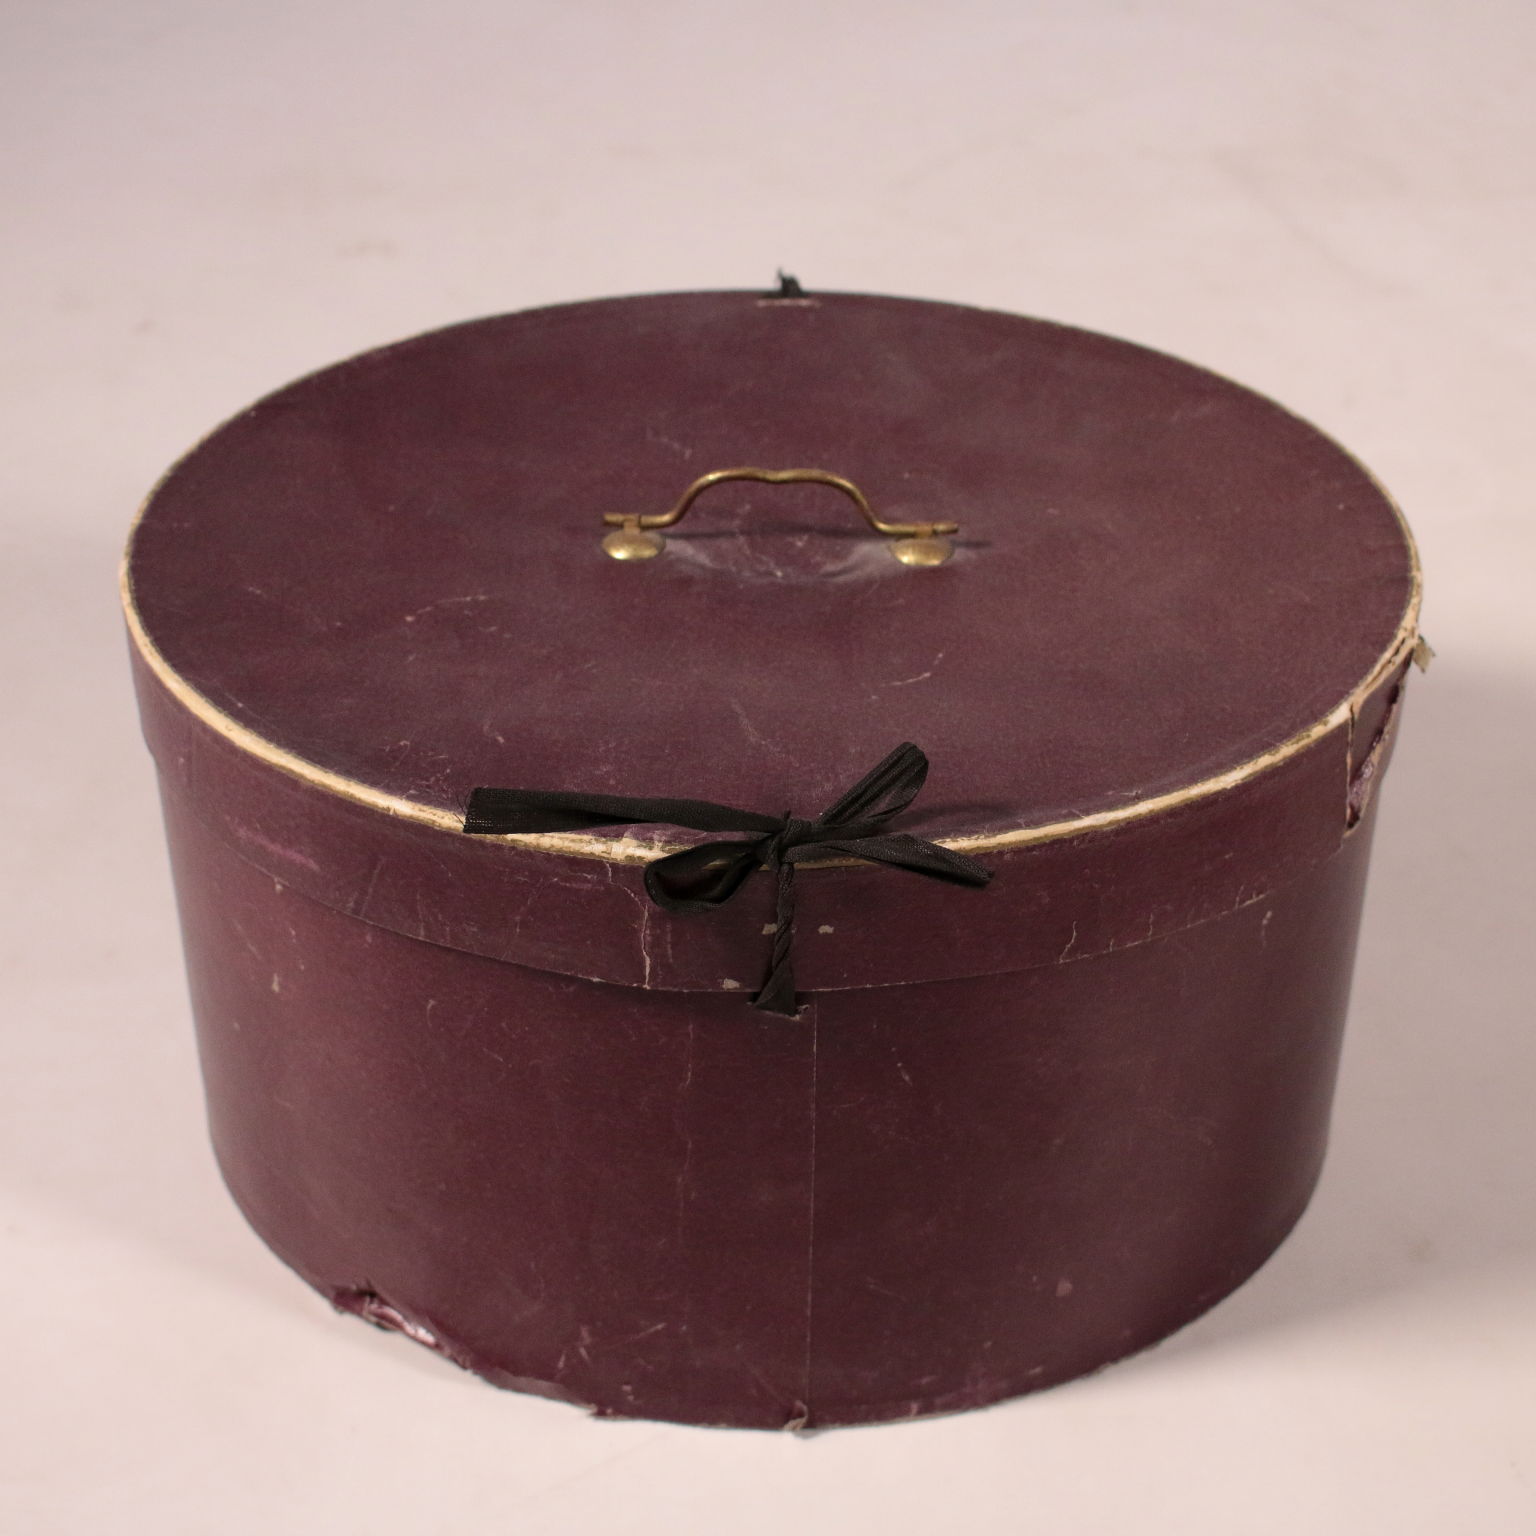 Antique French Hat Box, 1910 for sale at Pamono